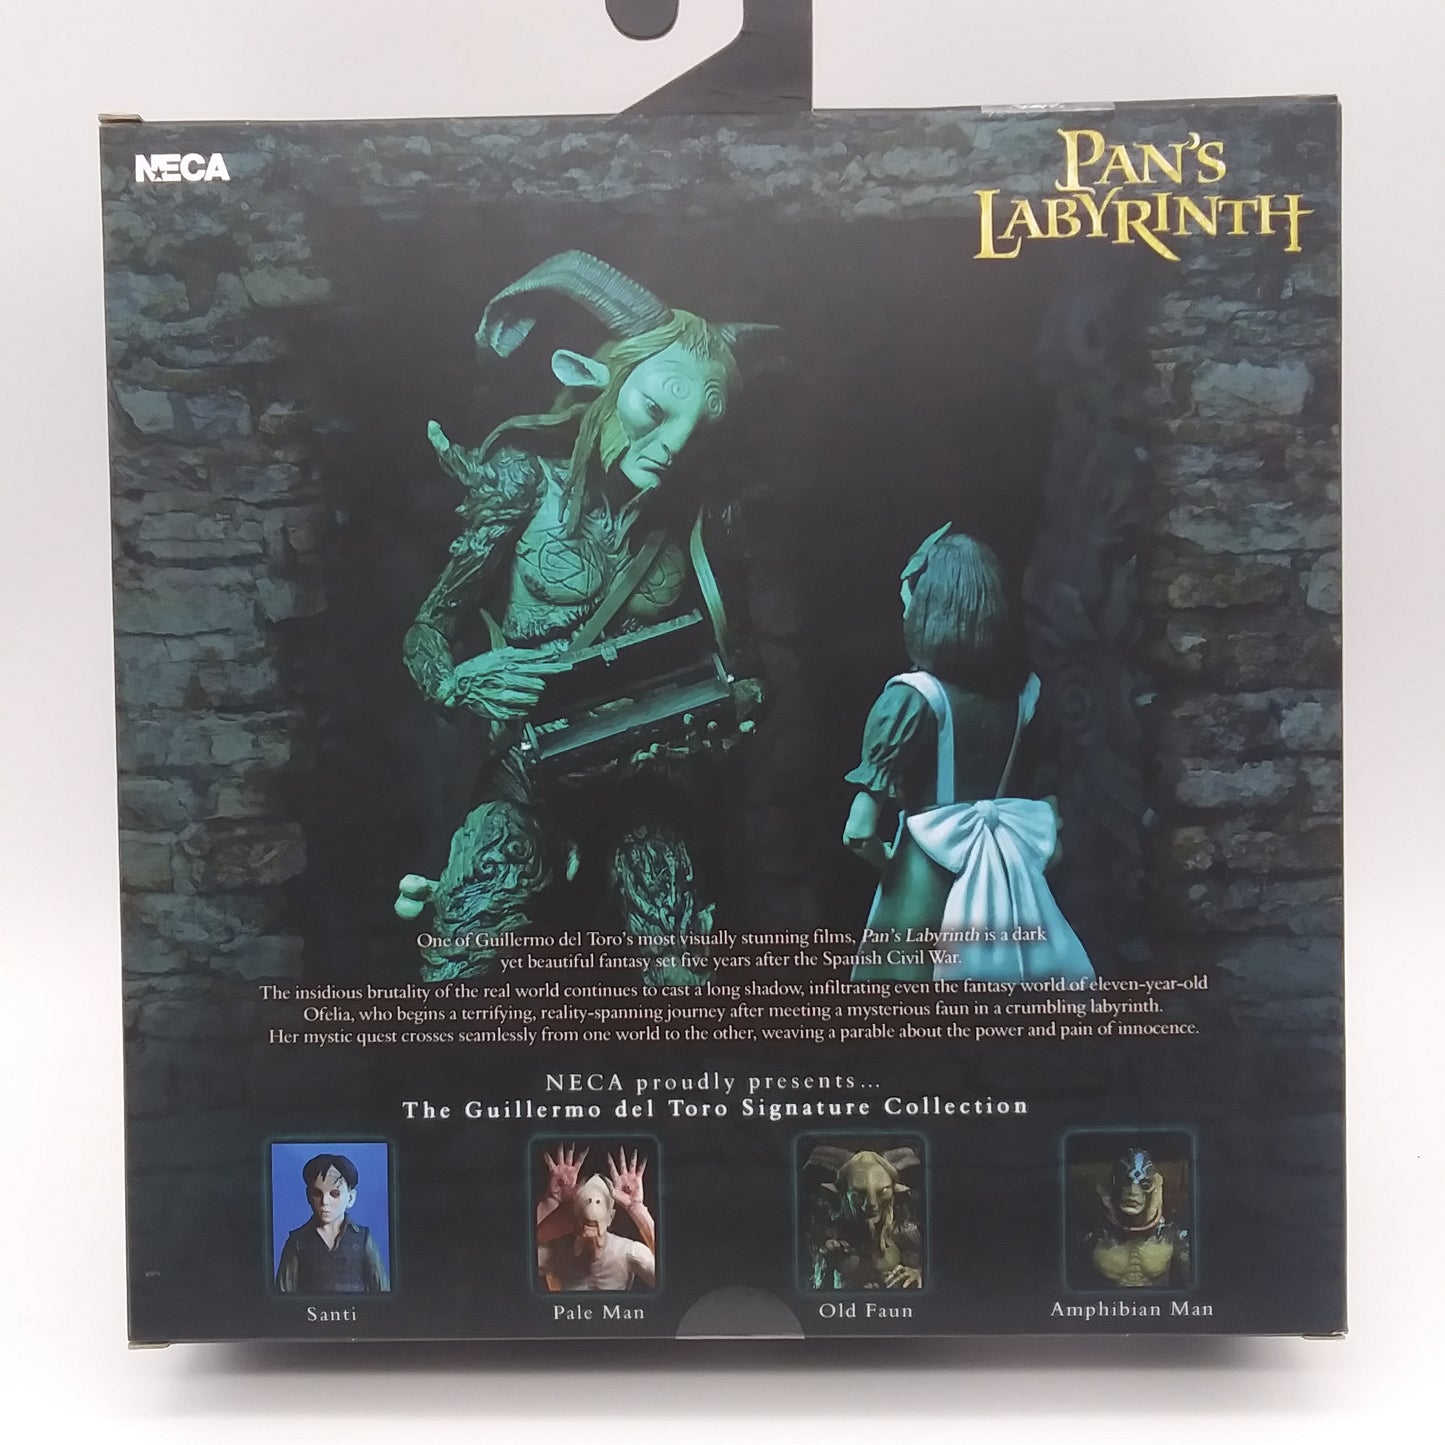 Neca Pan's Labyrinth 2-pack (Wal-Mart exclusive)